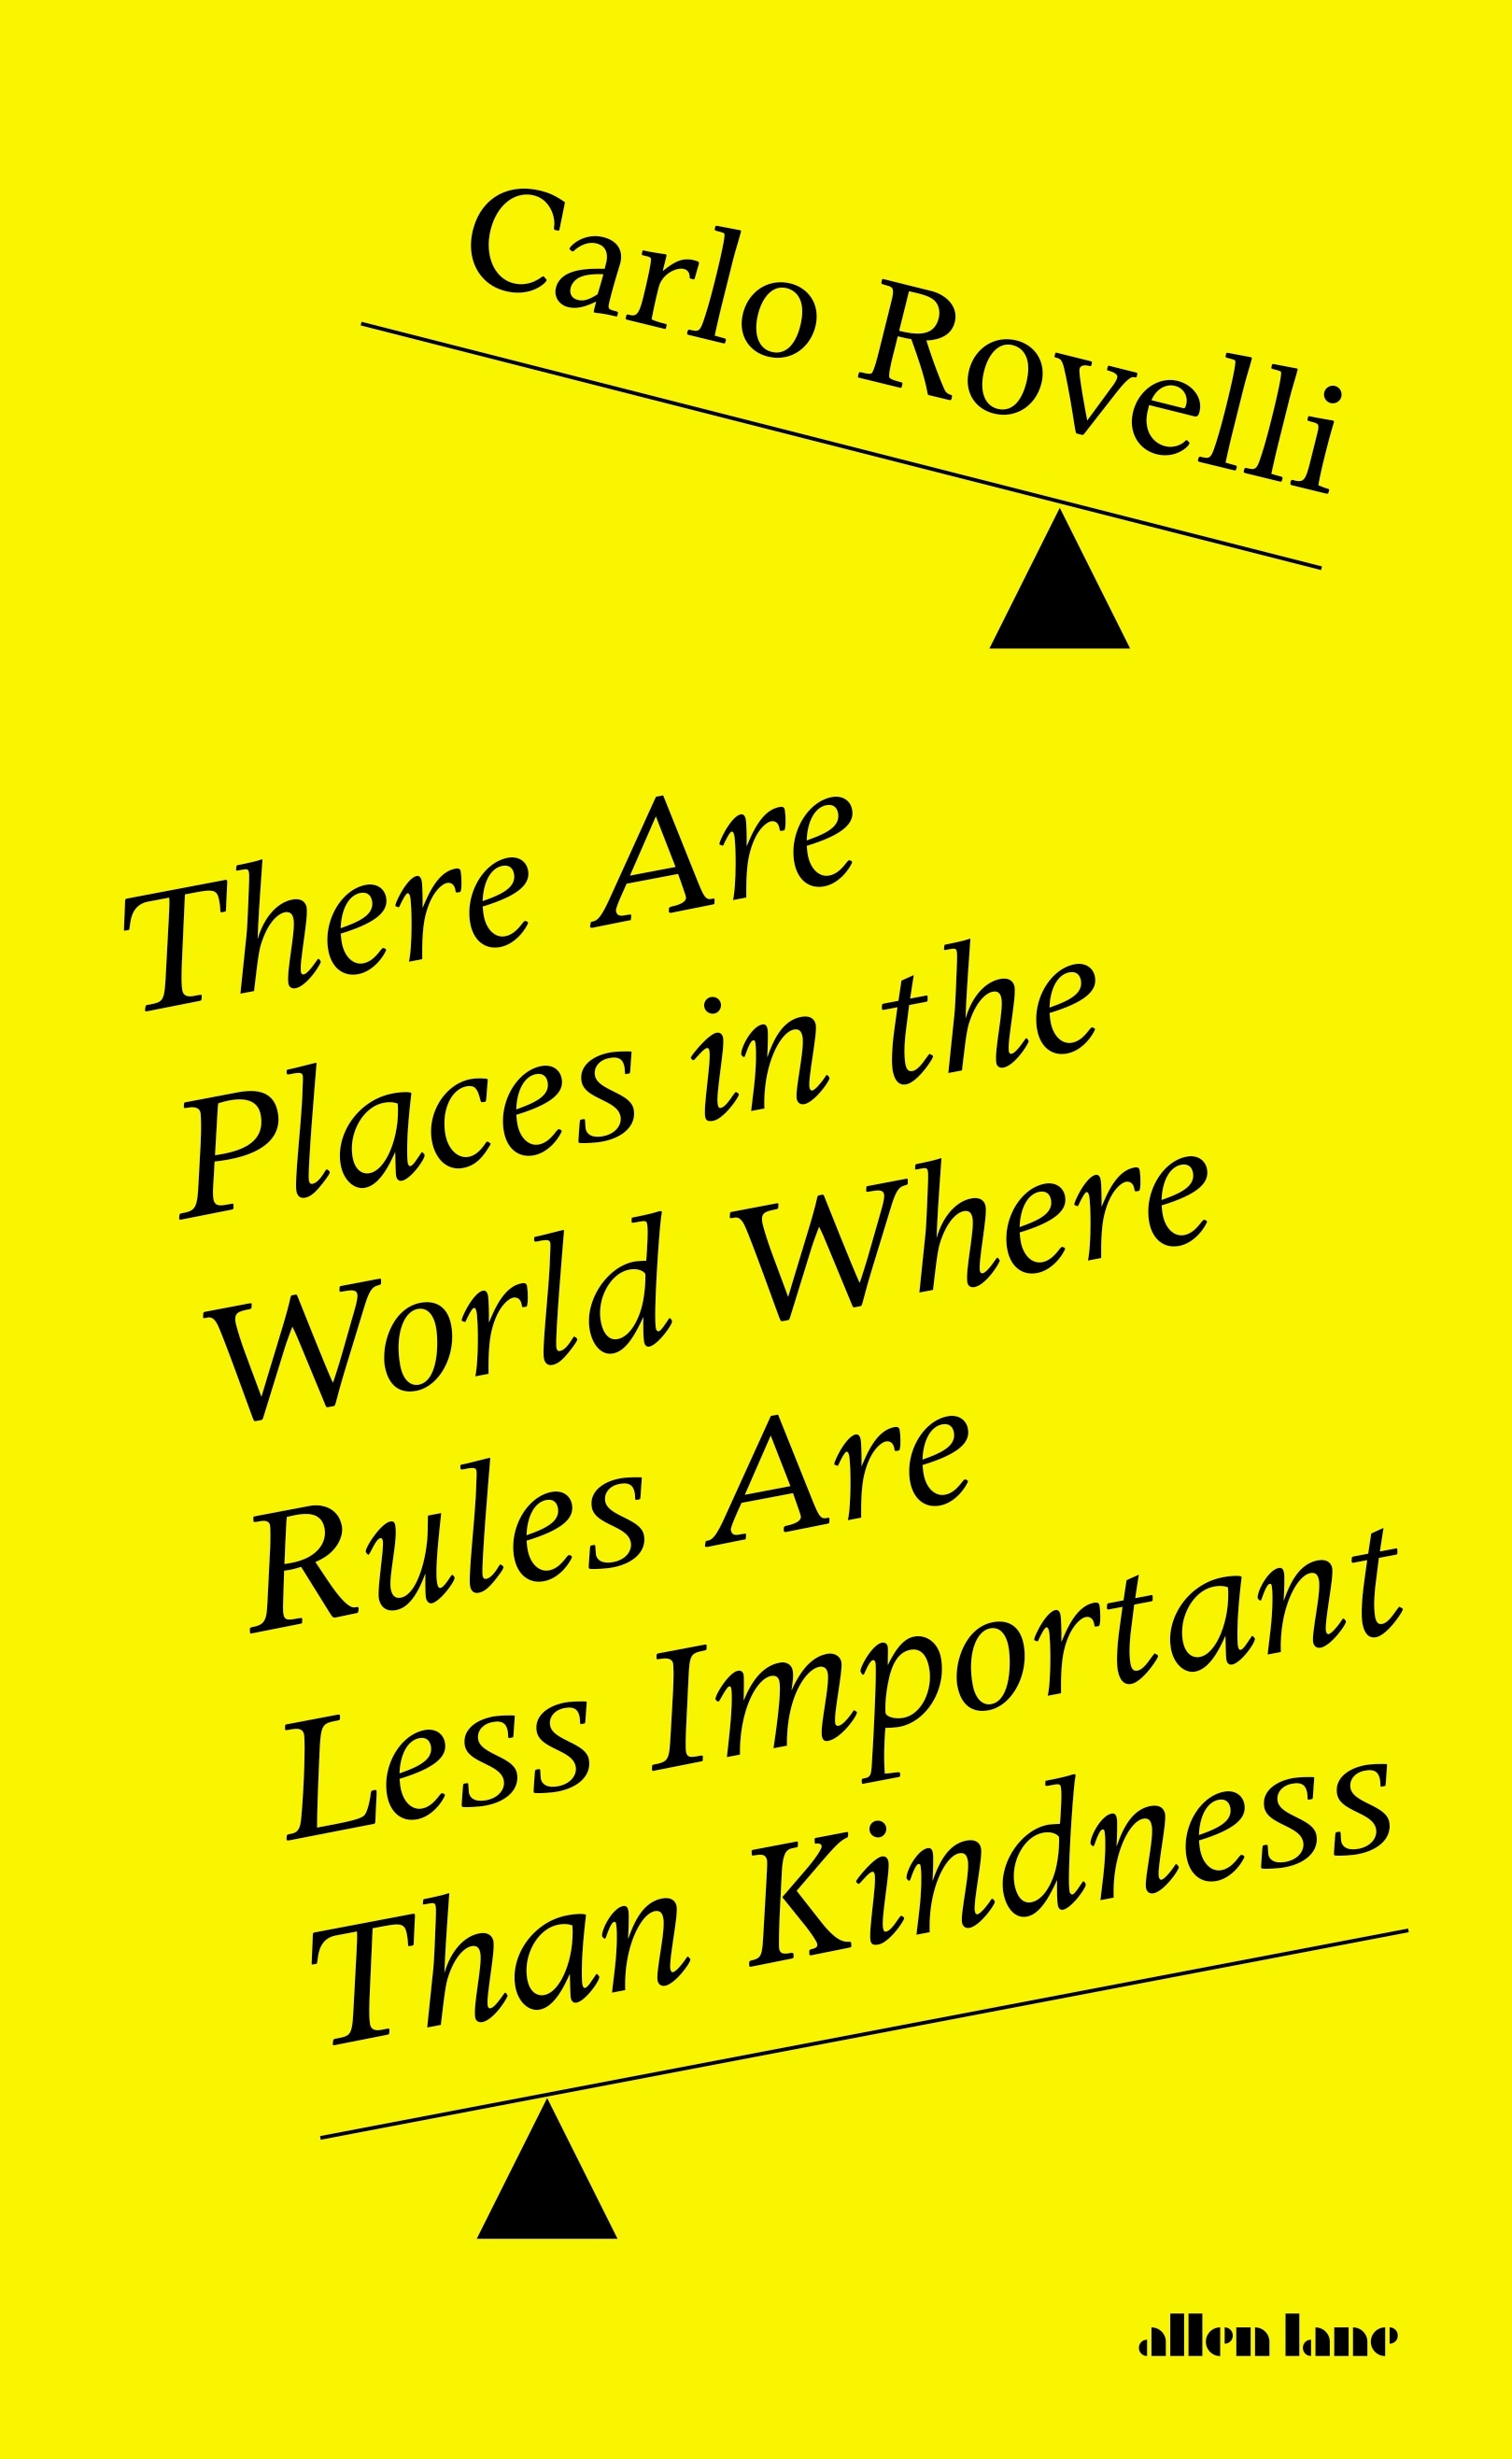 Книга «There Are Places in the World Where Rules Are Less Important Than Kindness» Carlo Rovelli — 5 ноября 2020 г.